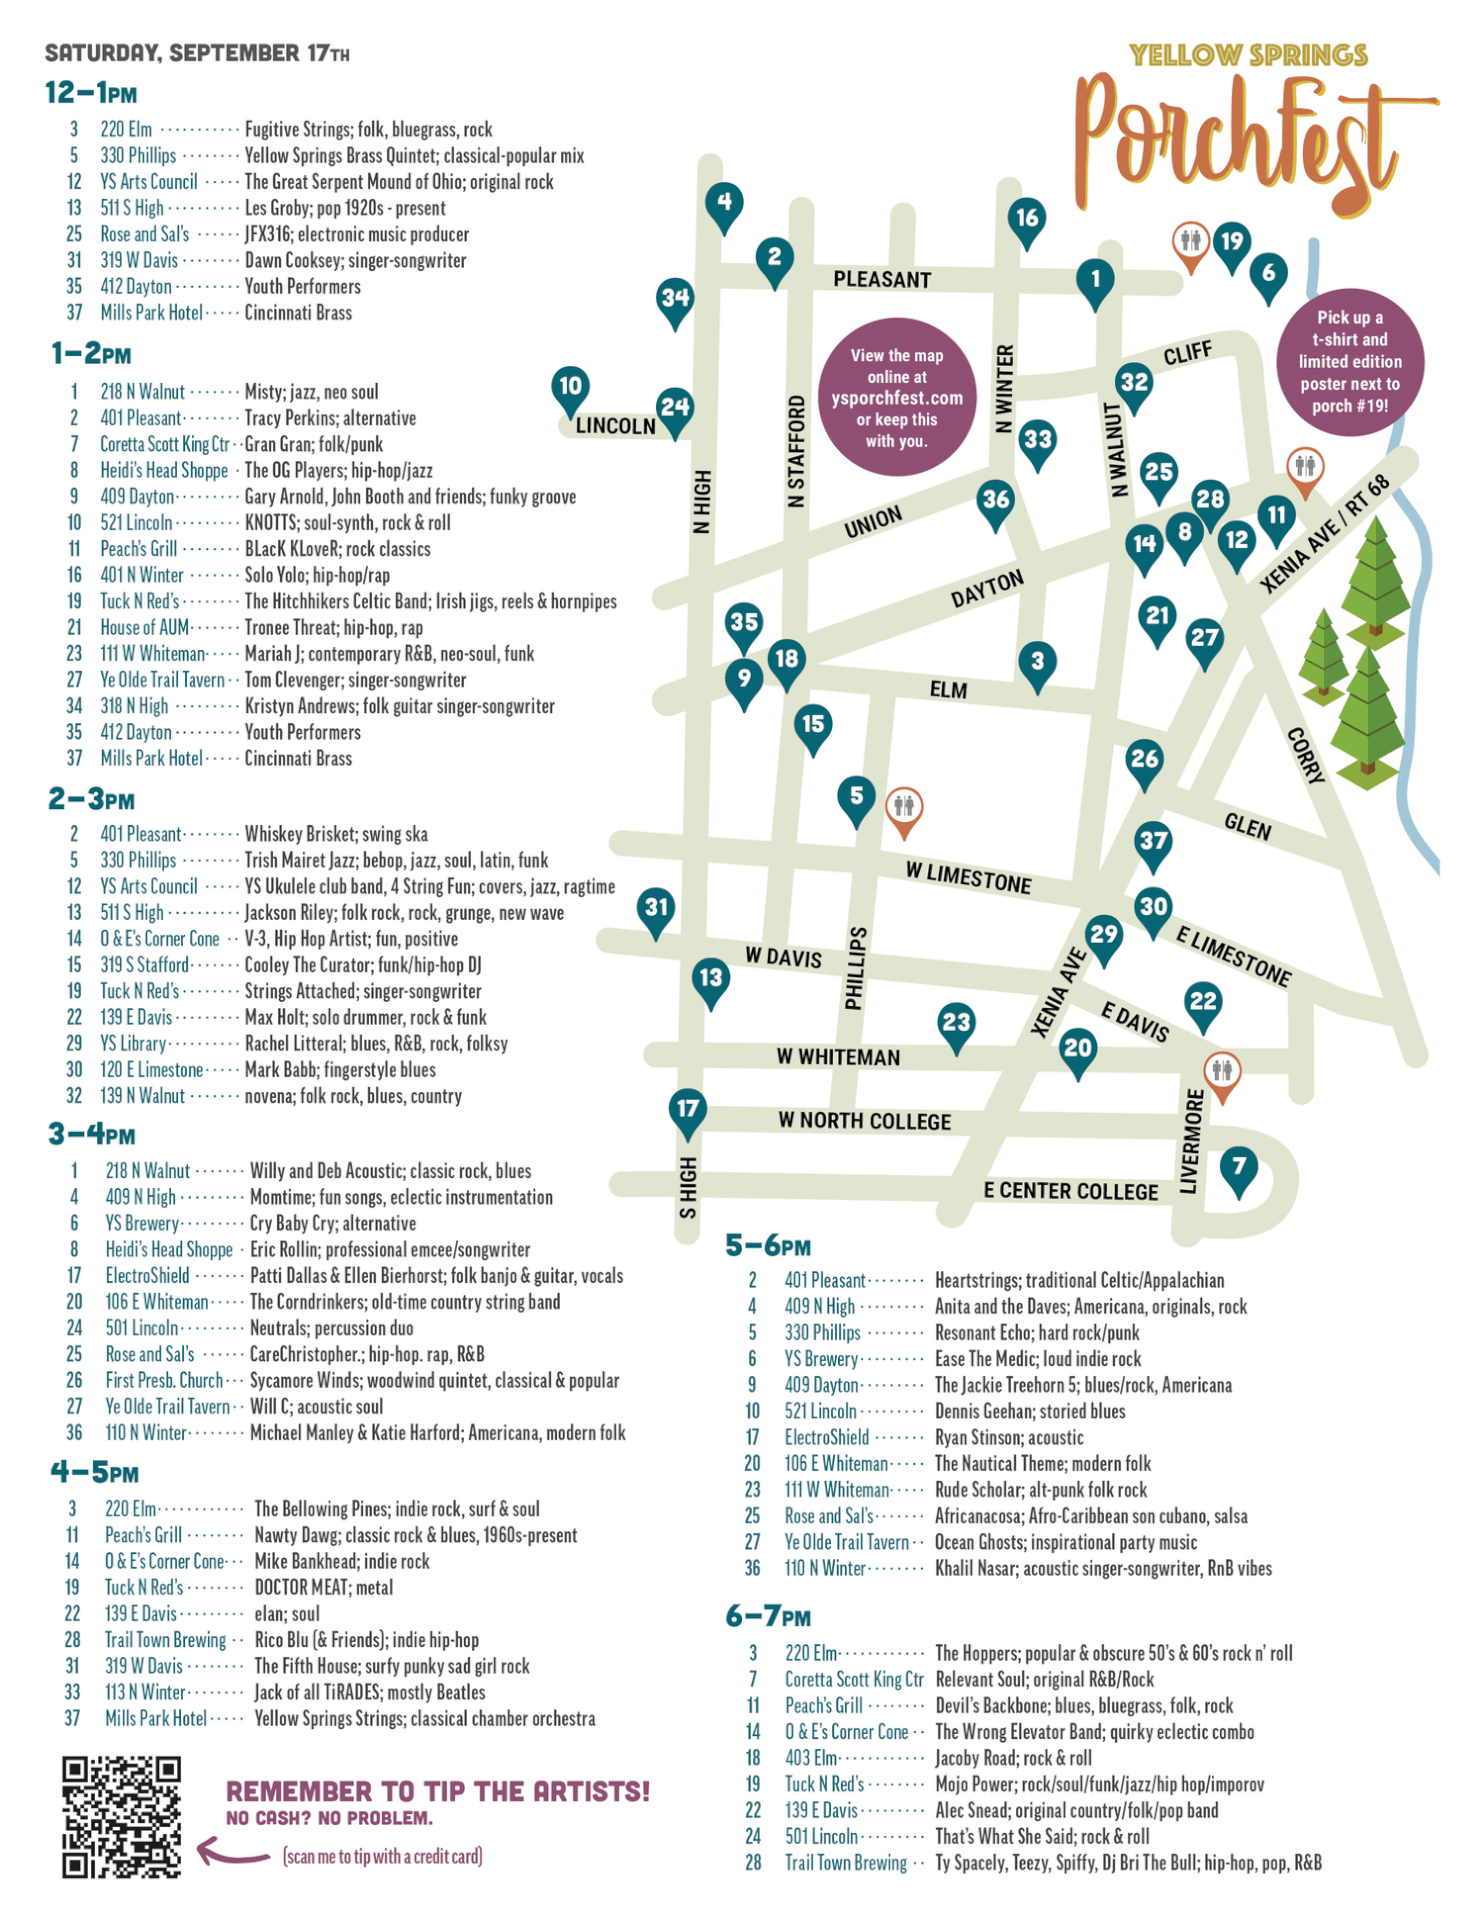 Yellow Springs Porchfest 2022 Map